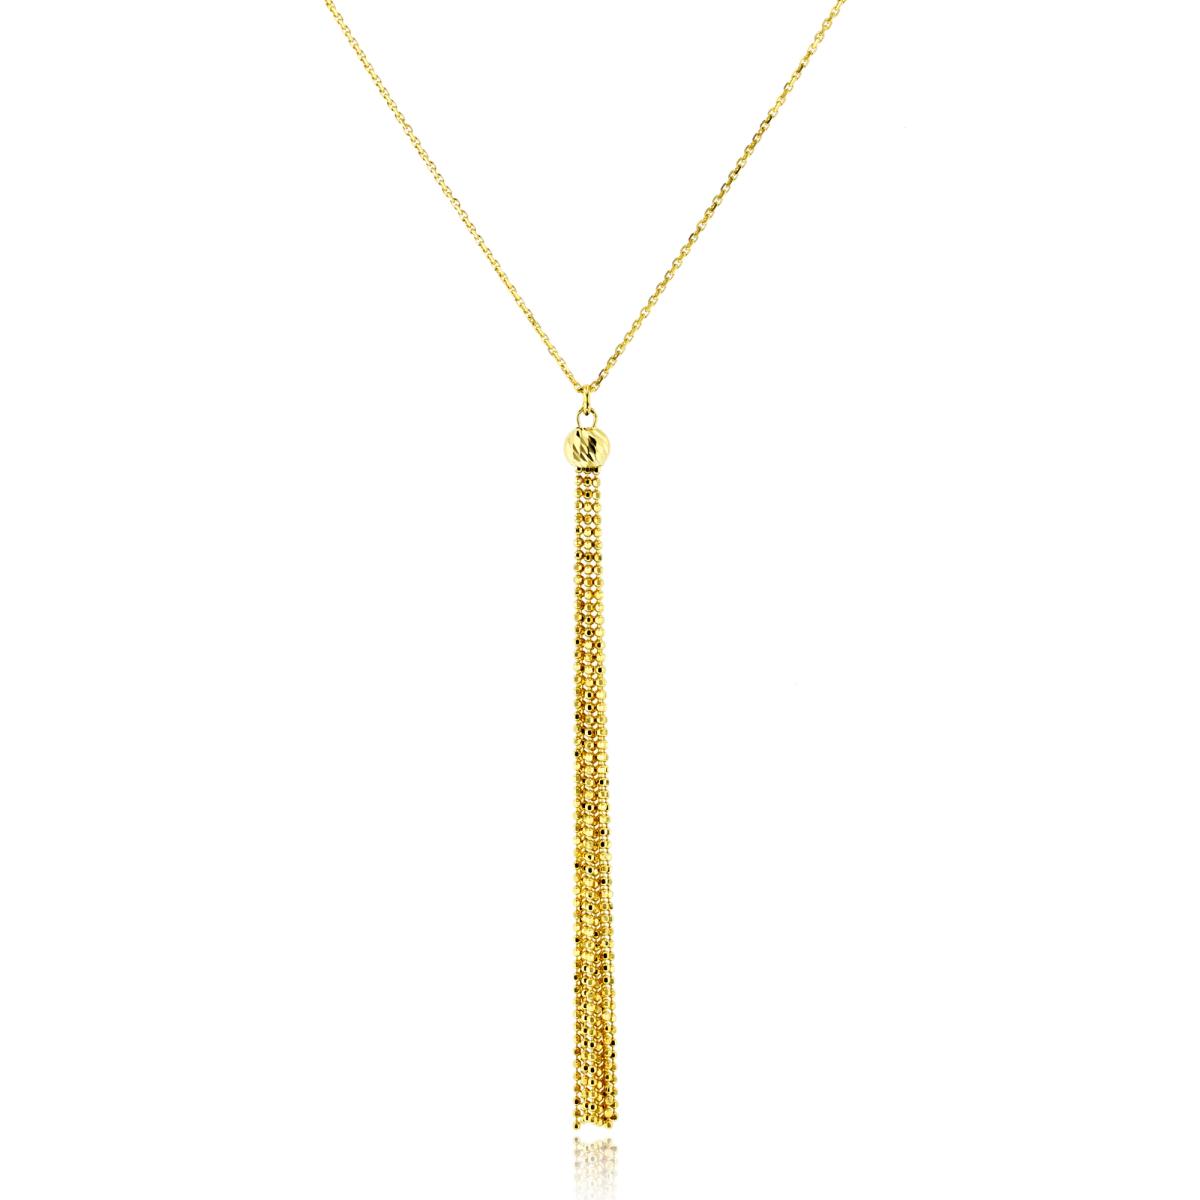 10K Yellow Gold DC Tassle 18" Beaded Necklace